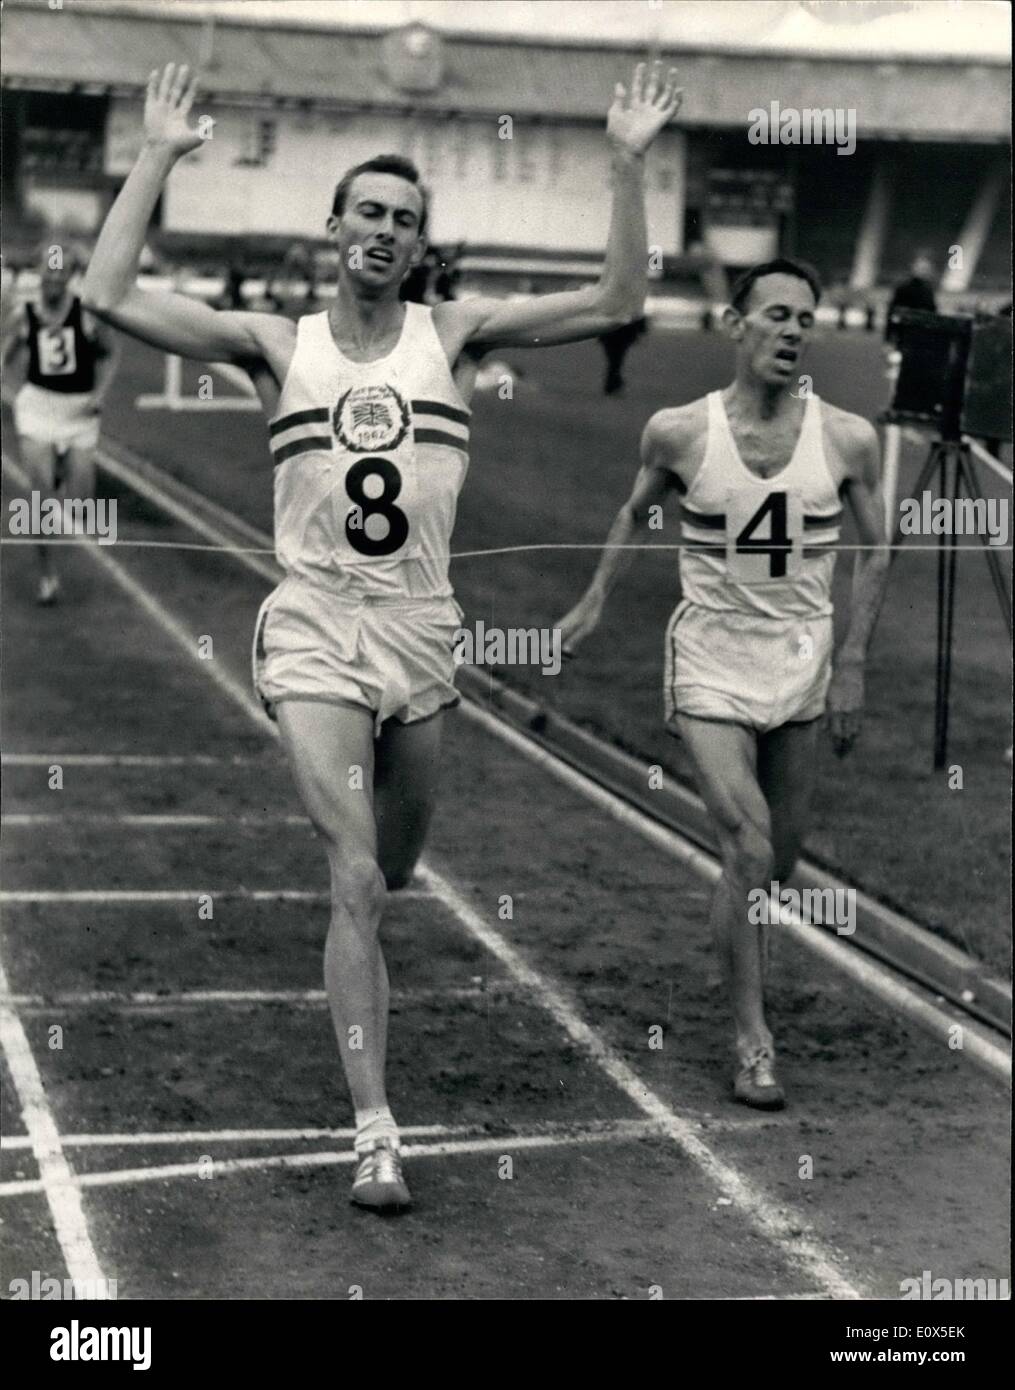 Jun. 06, 1965 - The British Games At The White City. Photo Shows:- The finish of the Two Mile invitation event showing D. Graham, of Great Britain (No.8) winning the event and setting up a new United Kingdom record, with E. Allonsius of Belgium (No. 4) who was second. Graham's time was 8 min. 33.8 secs. Stock Photo